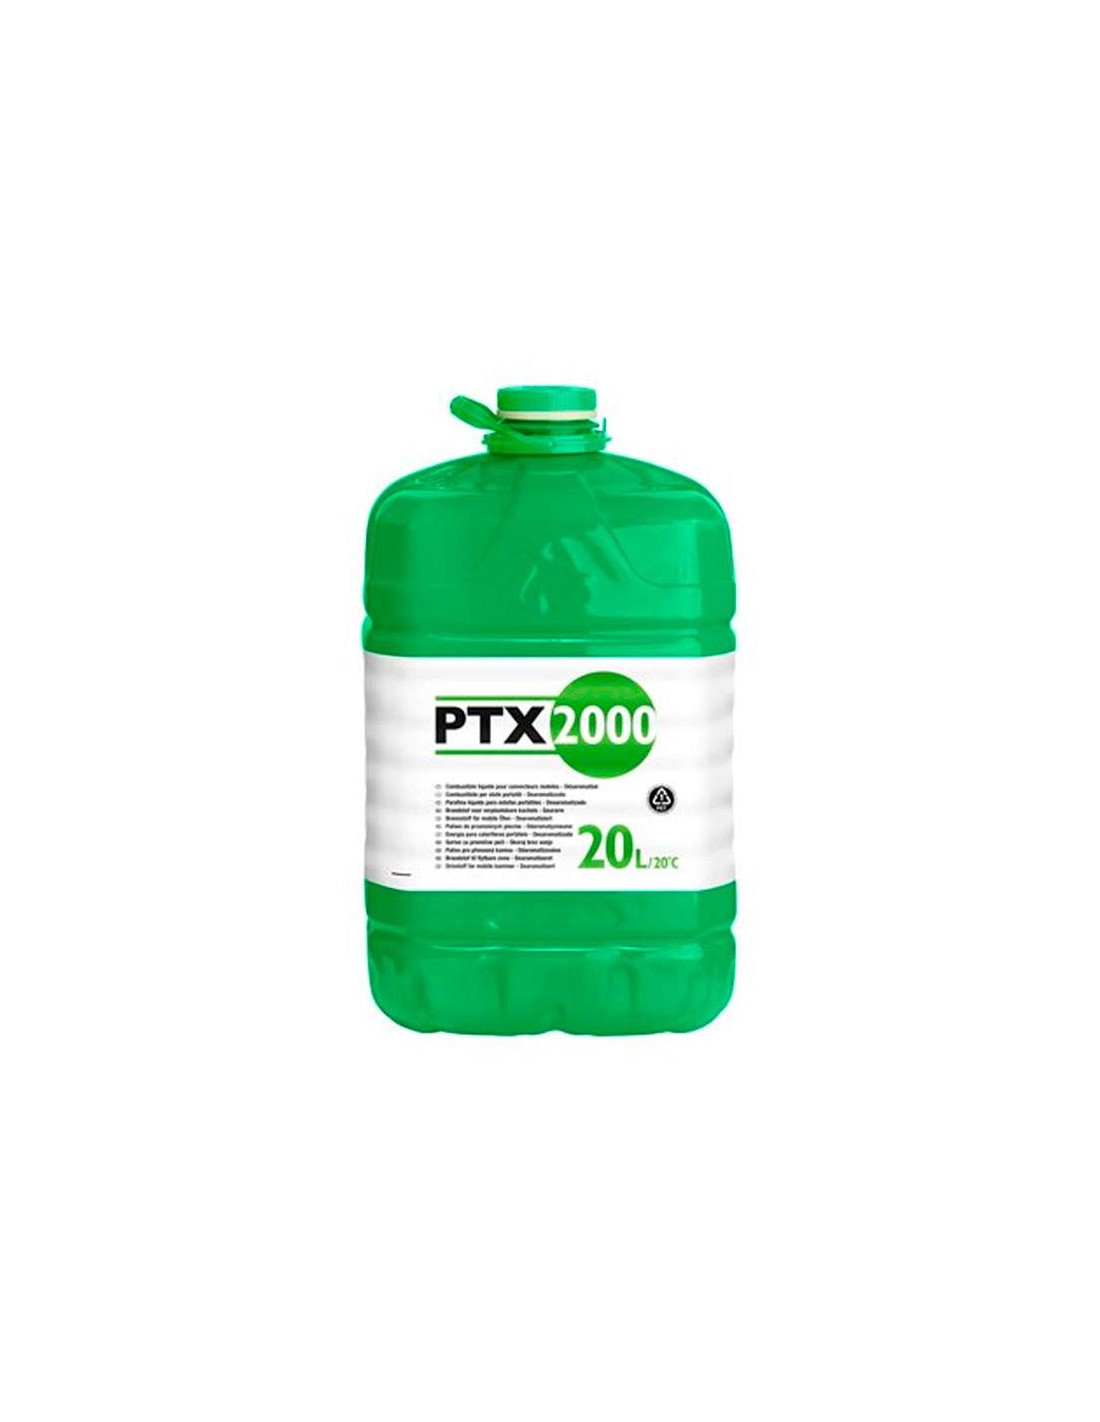 https://www.climamania.com/11000-thickbox_default/combustible-paraffine-ptx-2000-20-litres.jpg